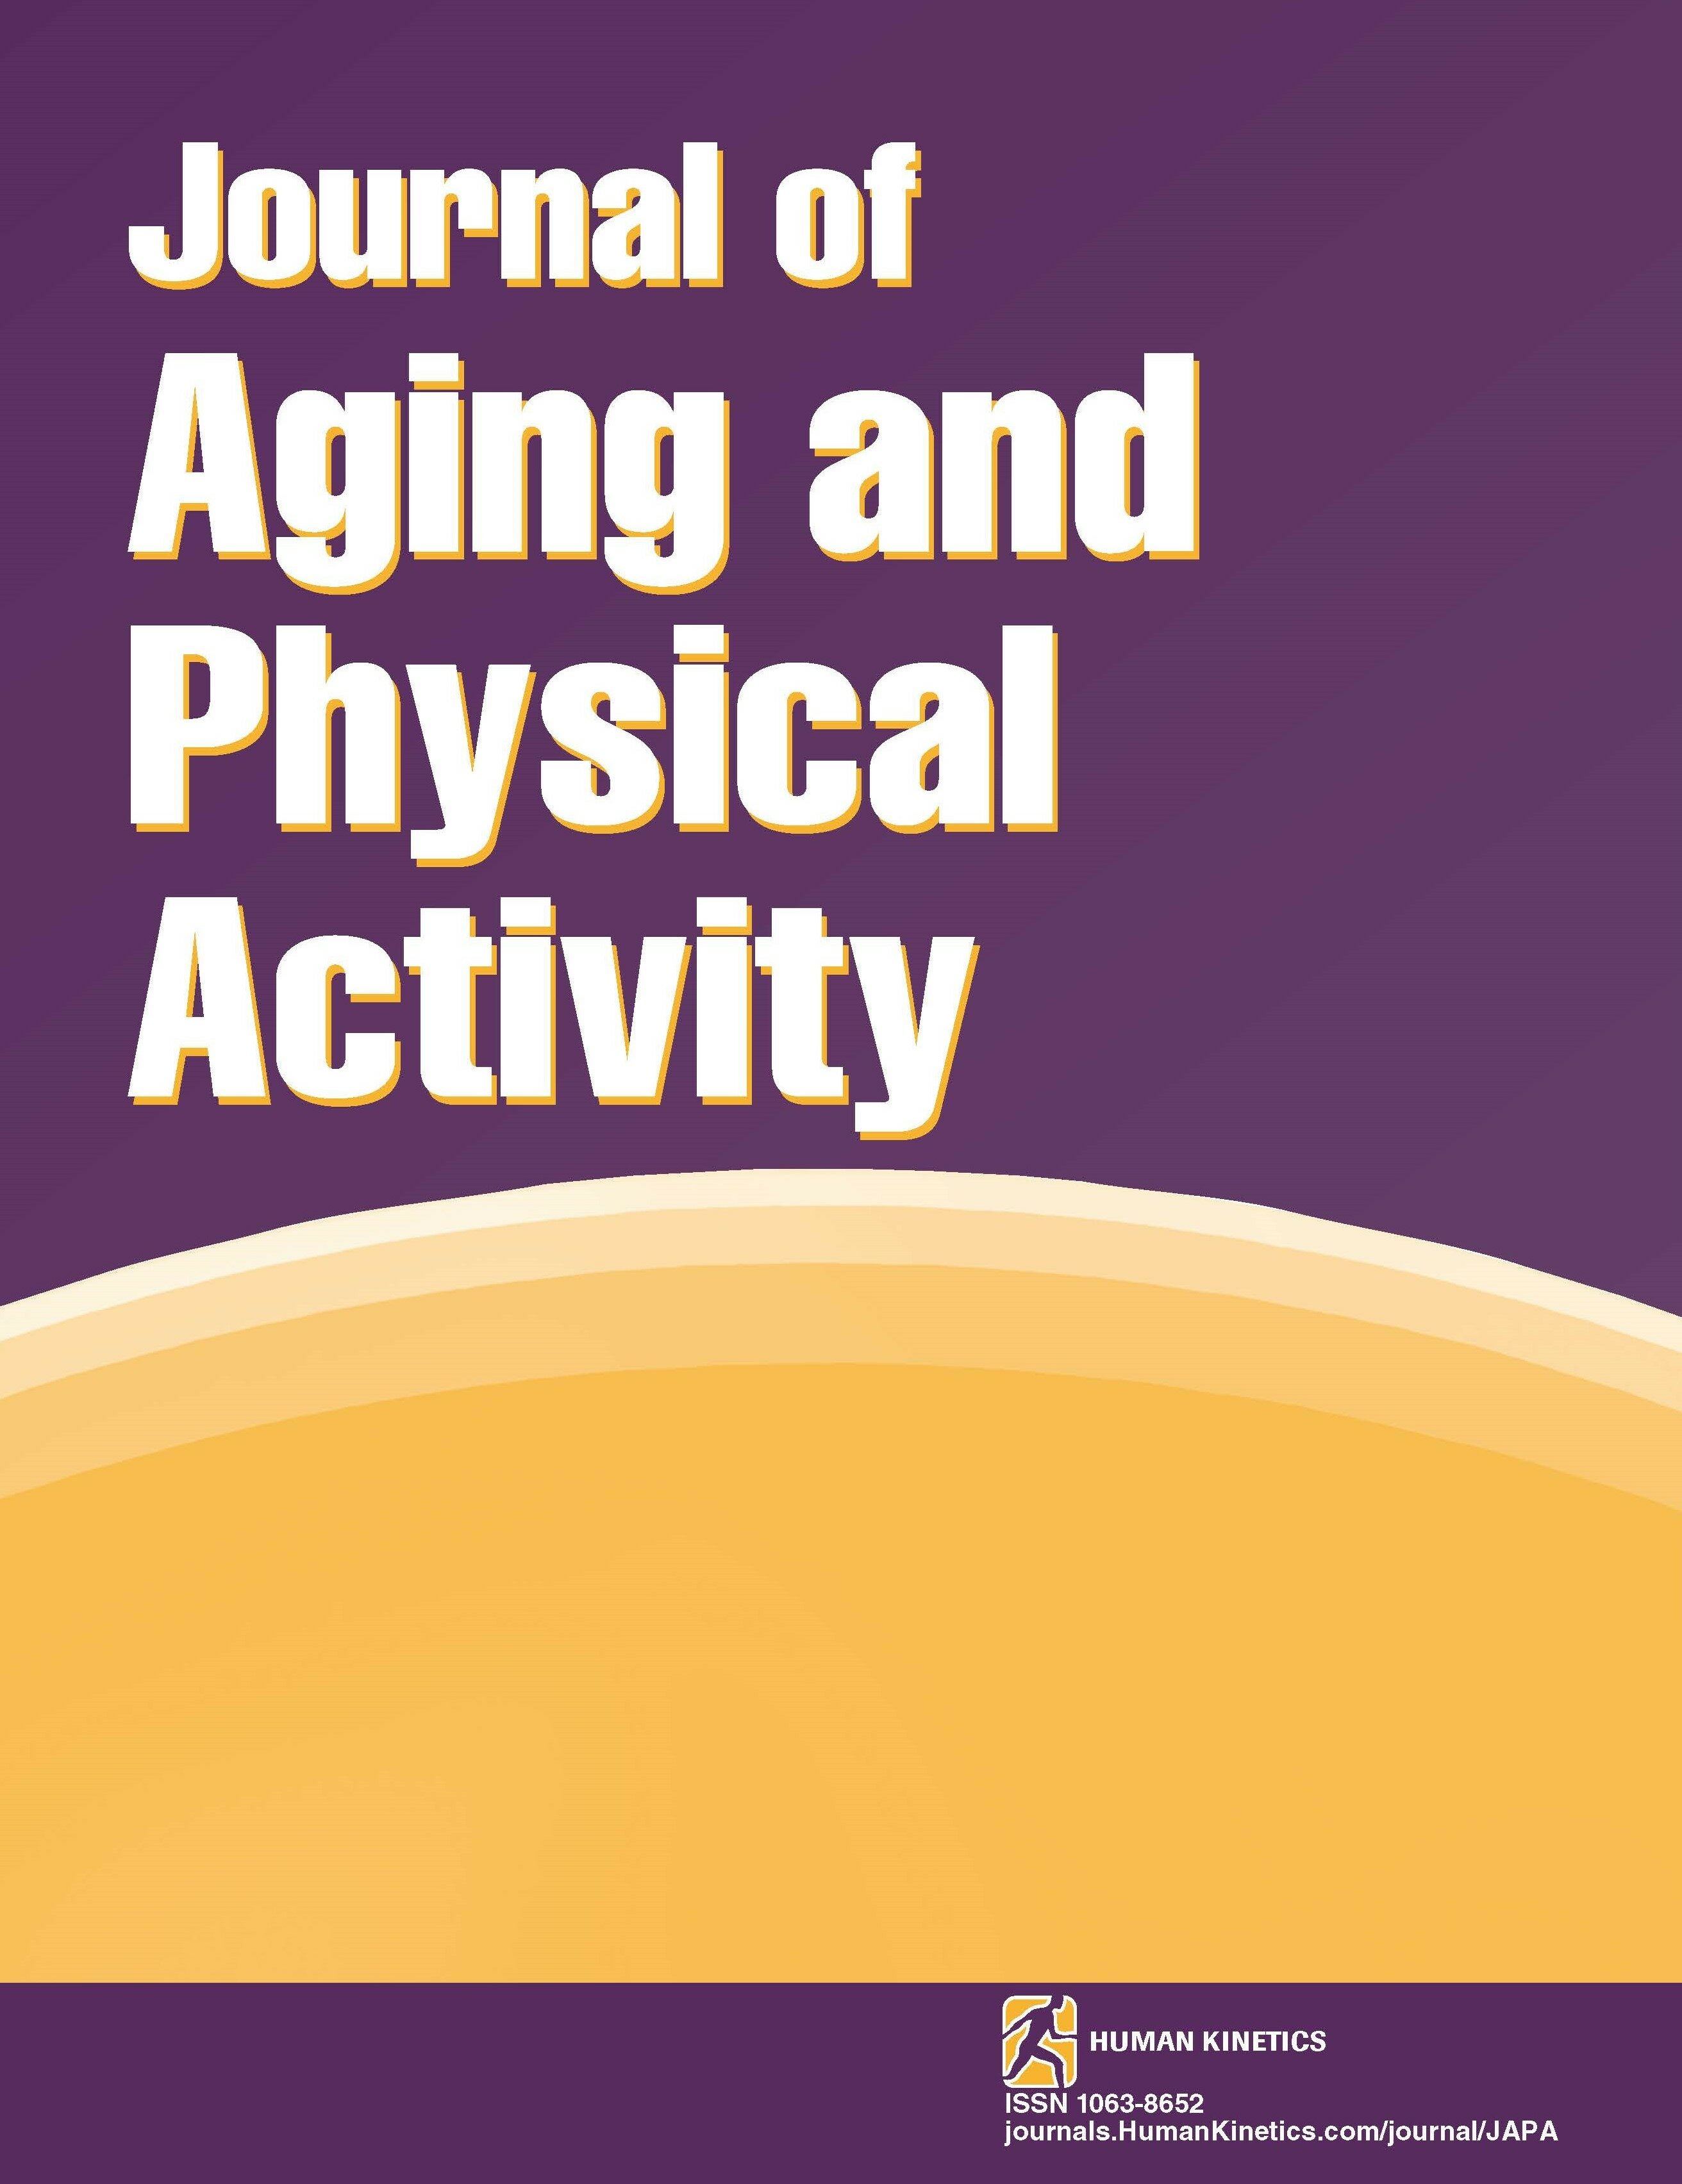 Objective and Self-Reported Physical Activity and Risk of Falling Among Community-Dwelling Older Adults From Southern Brazil